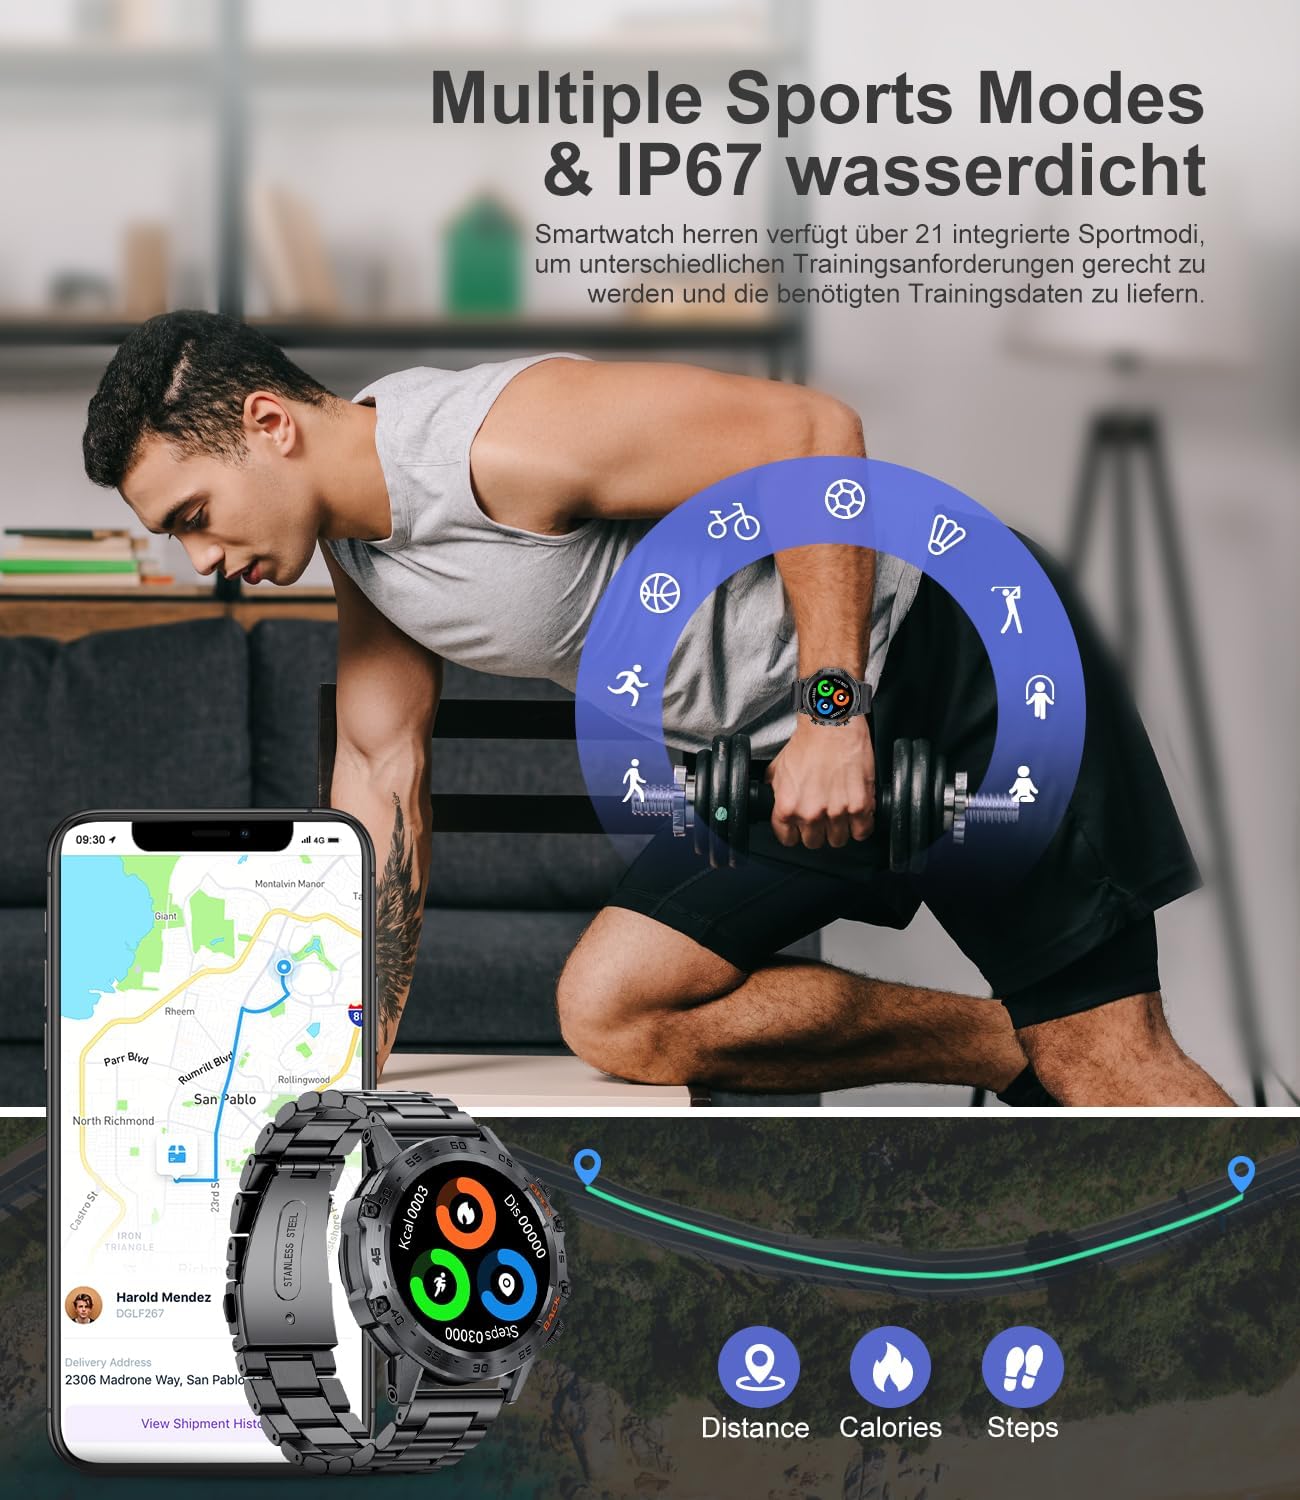 LIGE Mens Smartwatch with Metal Strap, 1.39 Inch Military Smart Watch with Heart Rate, Blood Pressure, Sleep Monitor for Android iOS, 100+ Sports Modes, Fitness Watch, IP67 Waterproof, Bluetooth